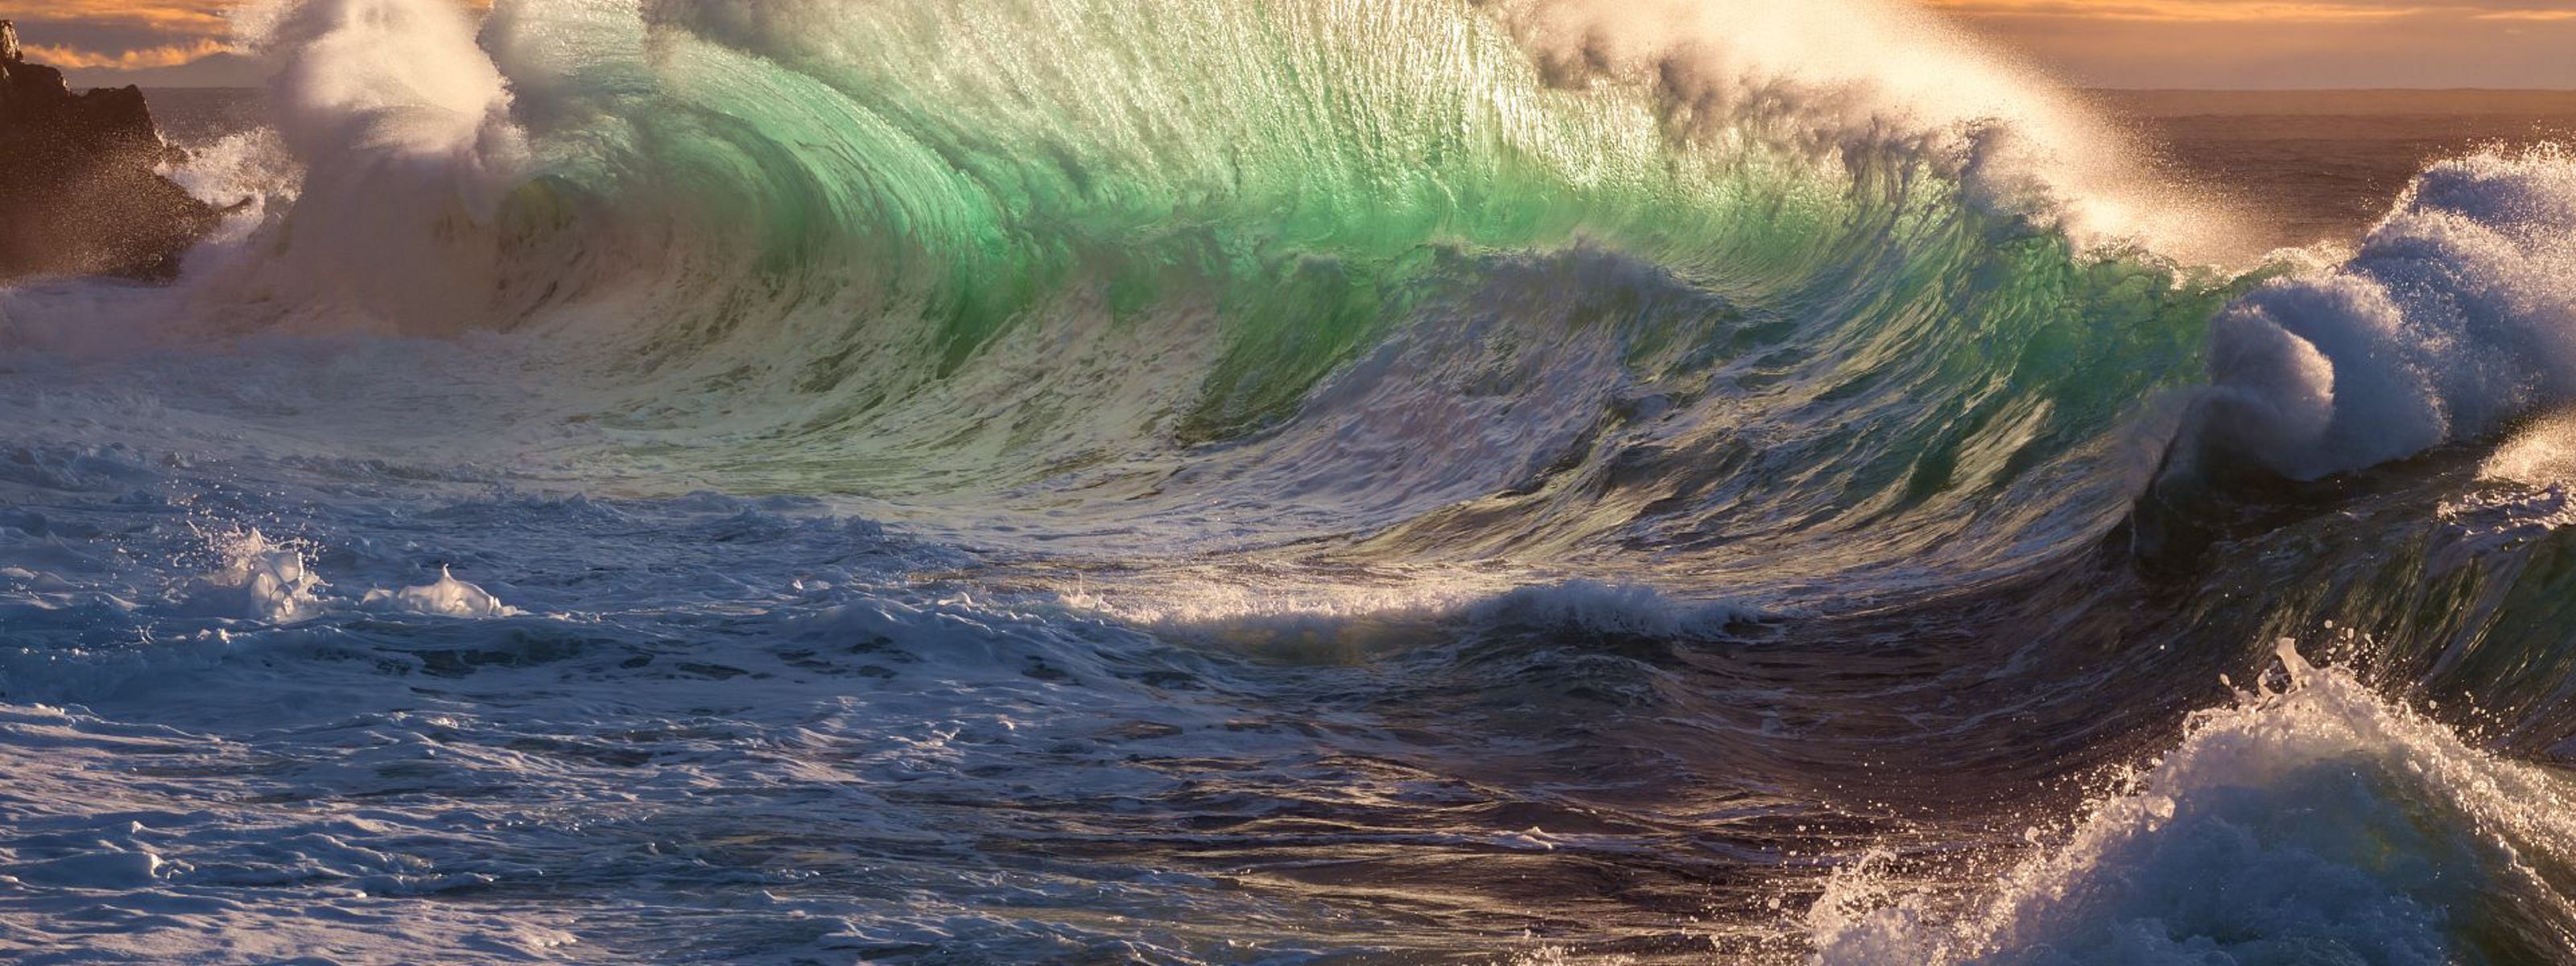 A massive wave breaks as the ocean swells towards the shore.